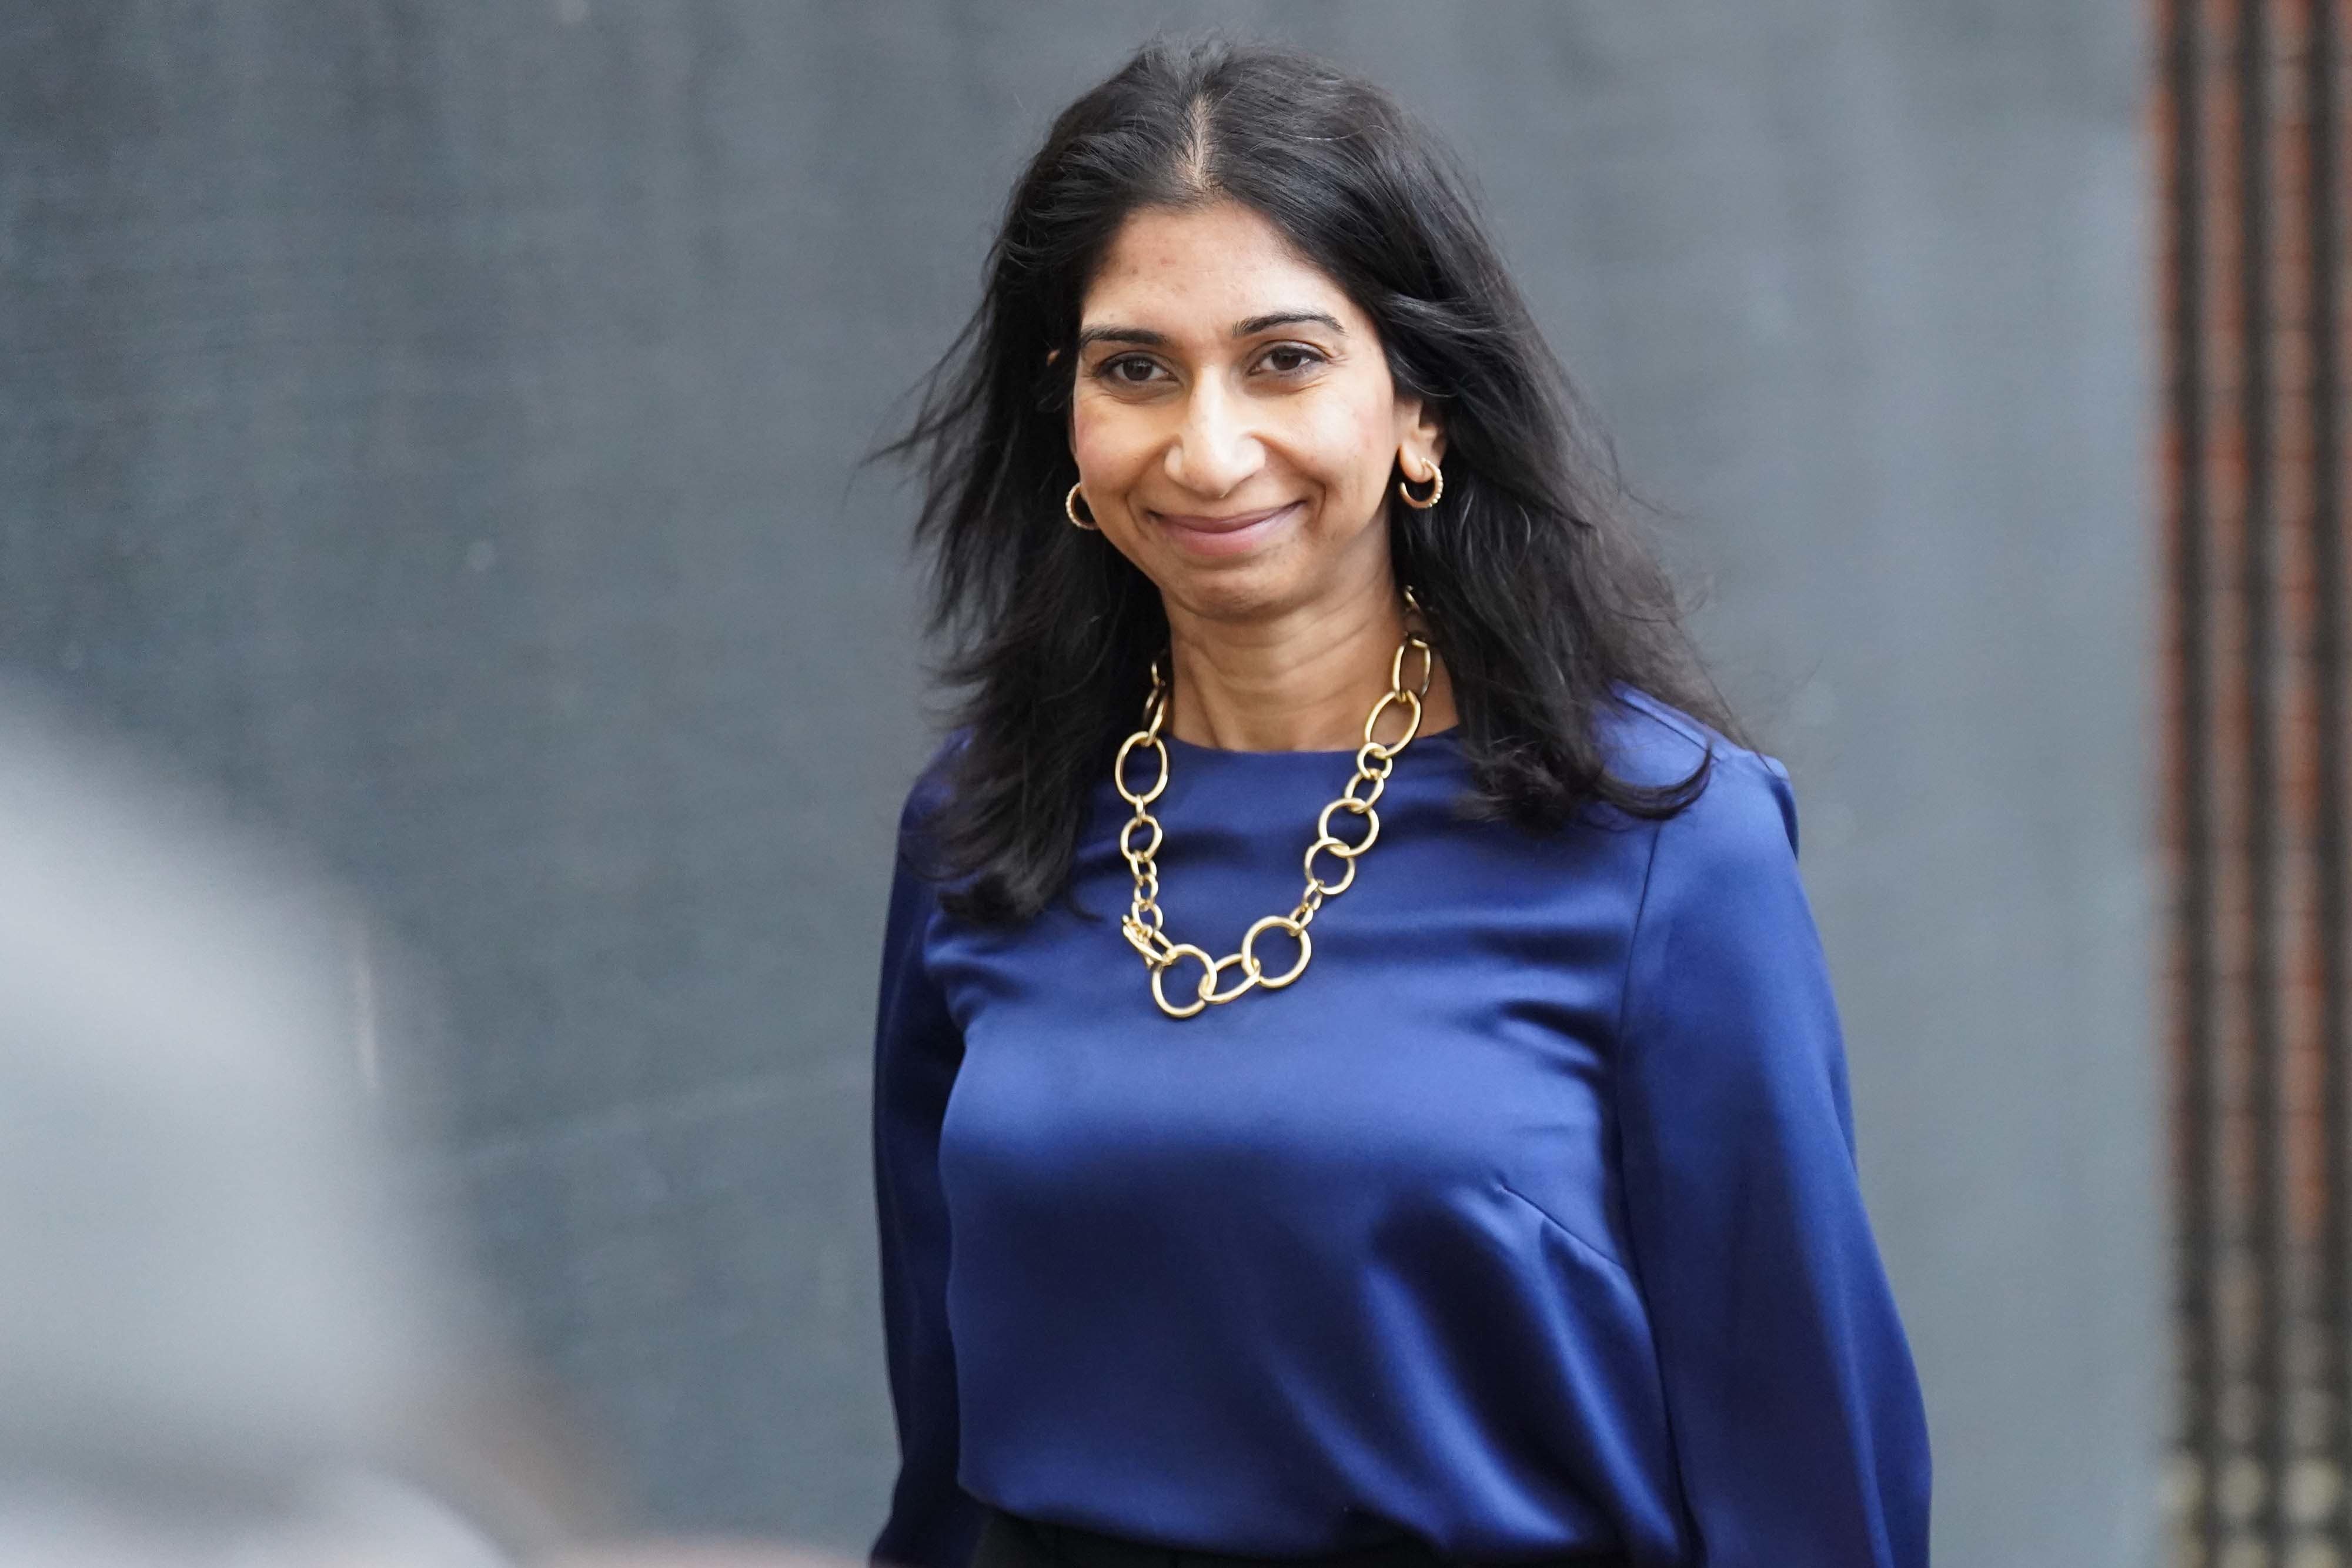 Suella Braverman has committed to a new recruitment round but no advert has been posted by the government